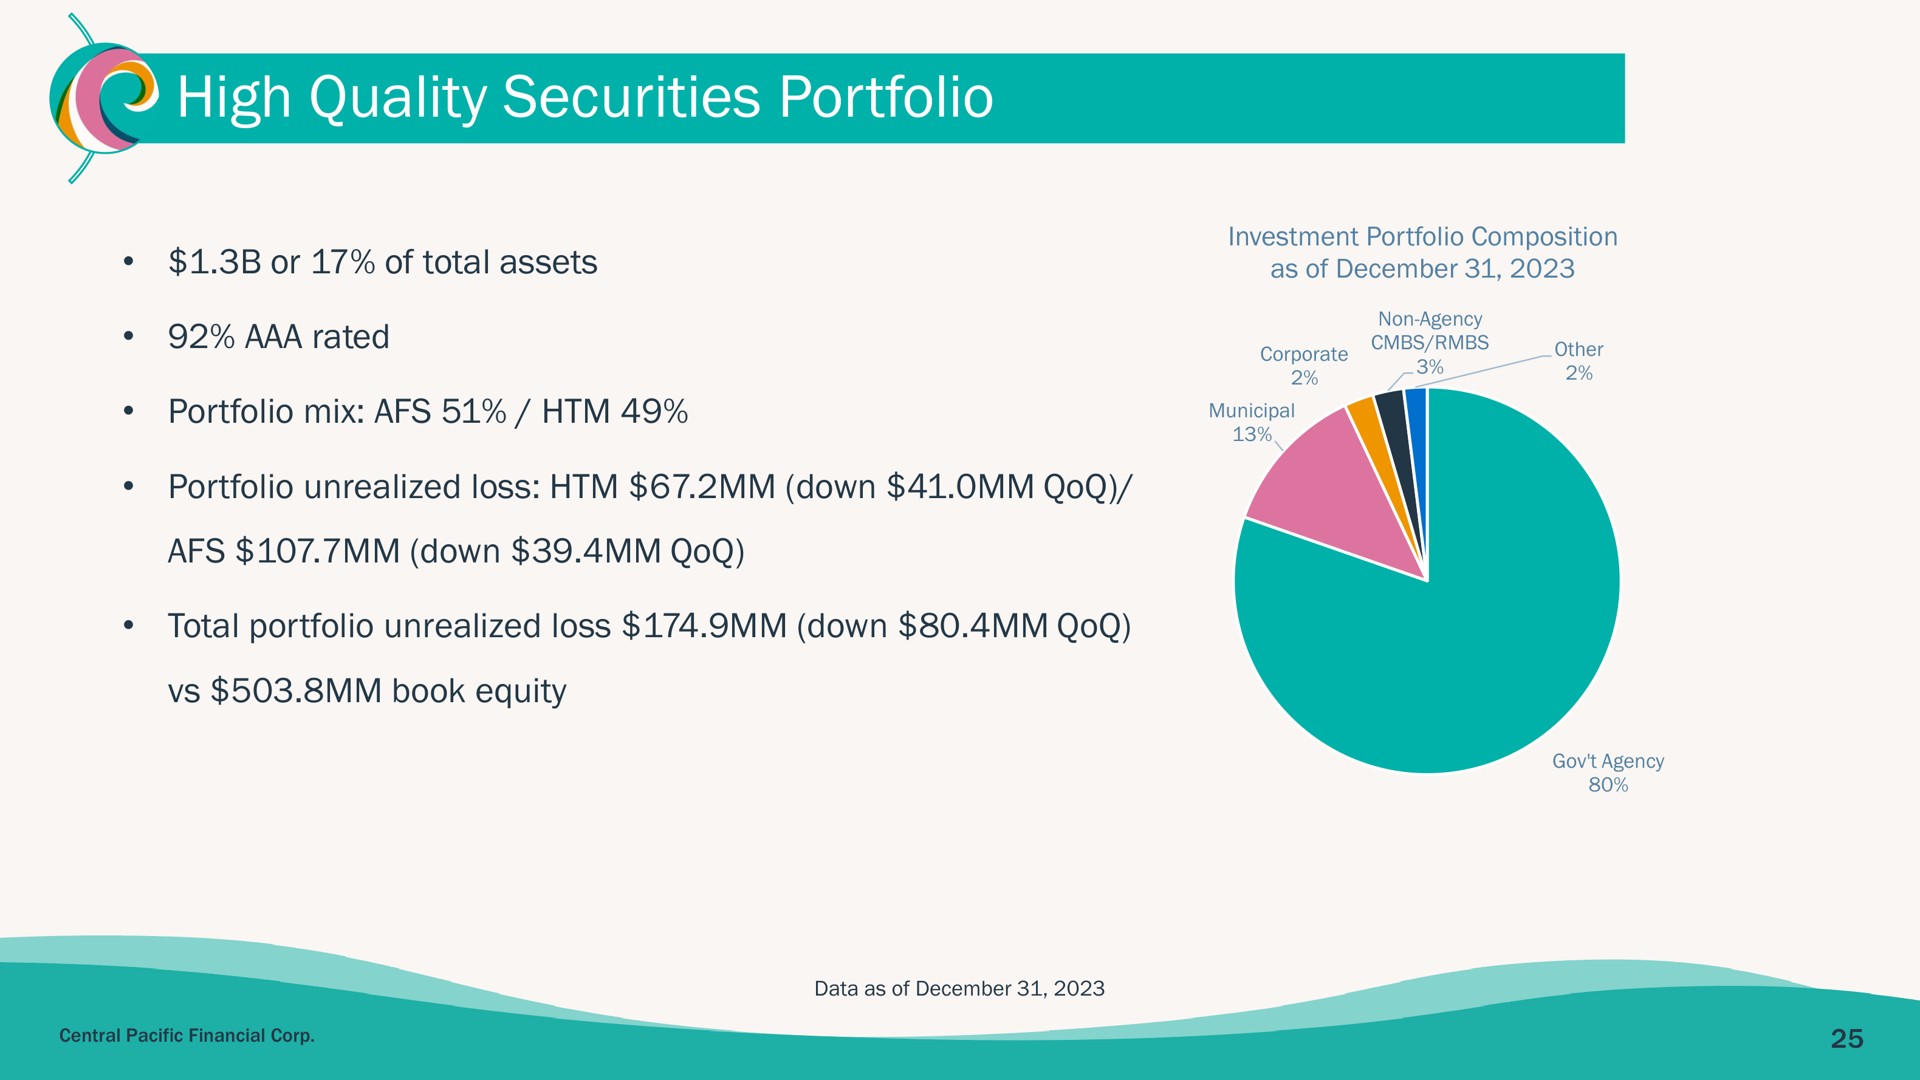 high quality securities portfolio rated corporate | Central Pacific Financial